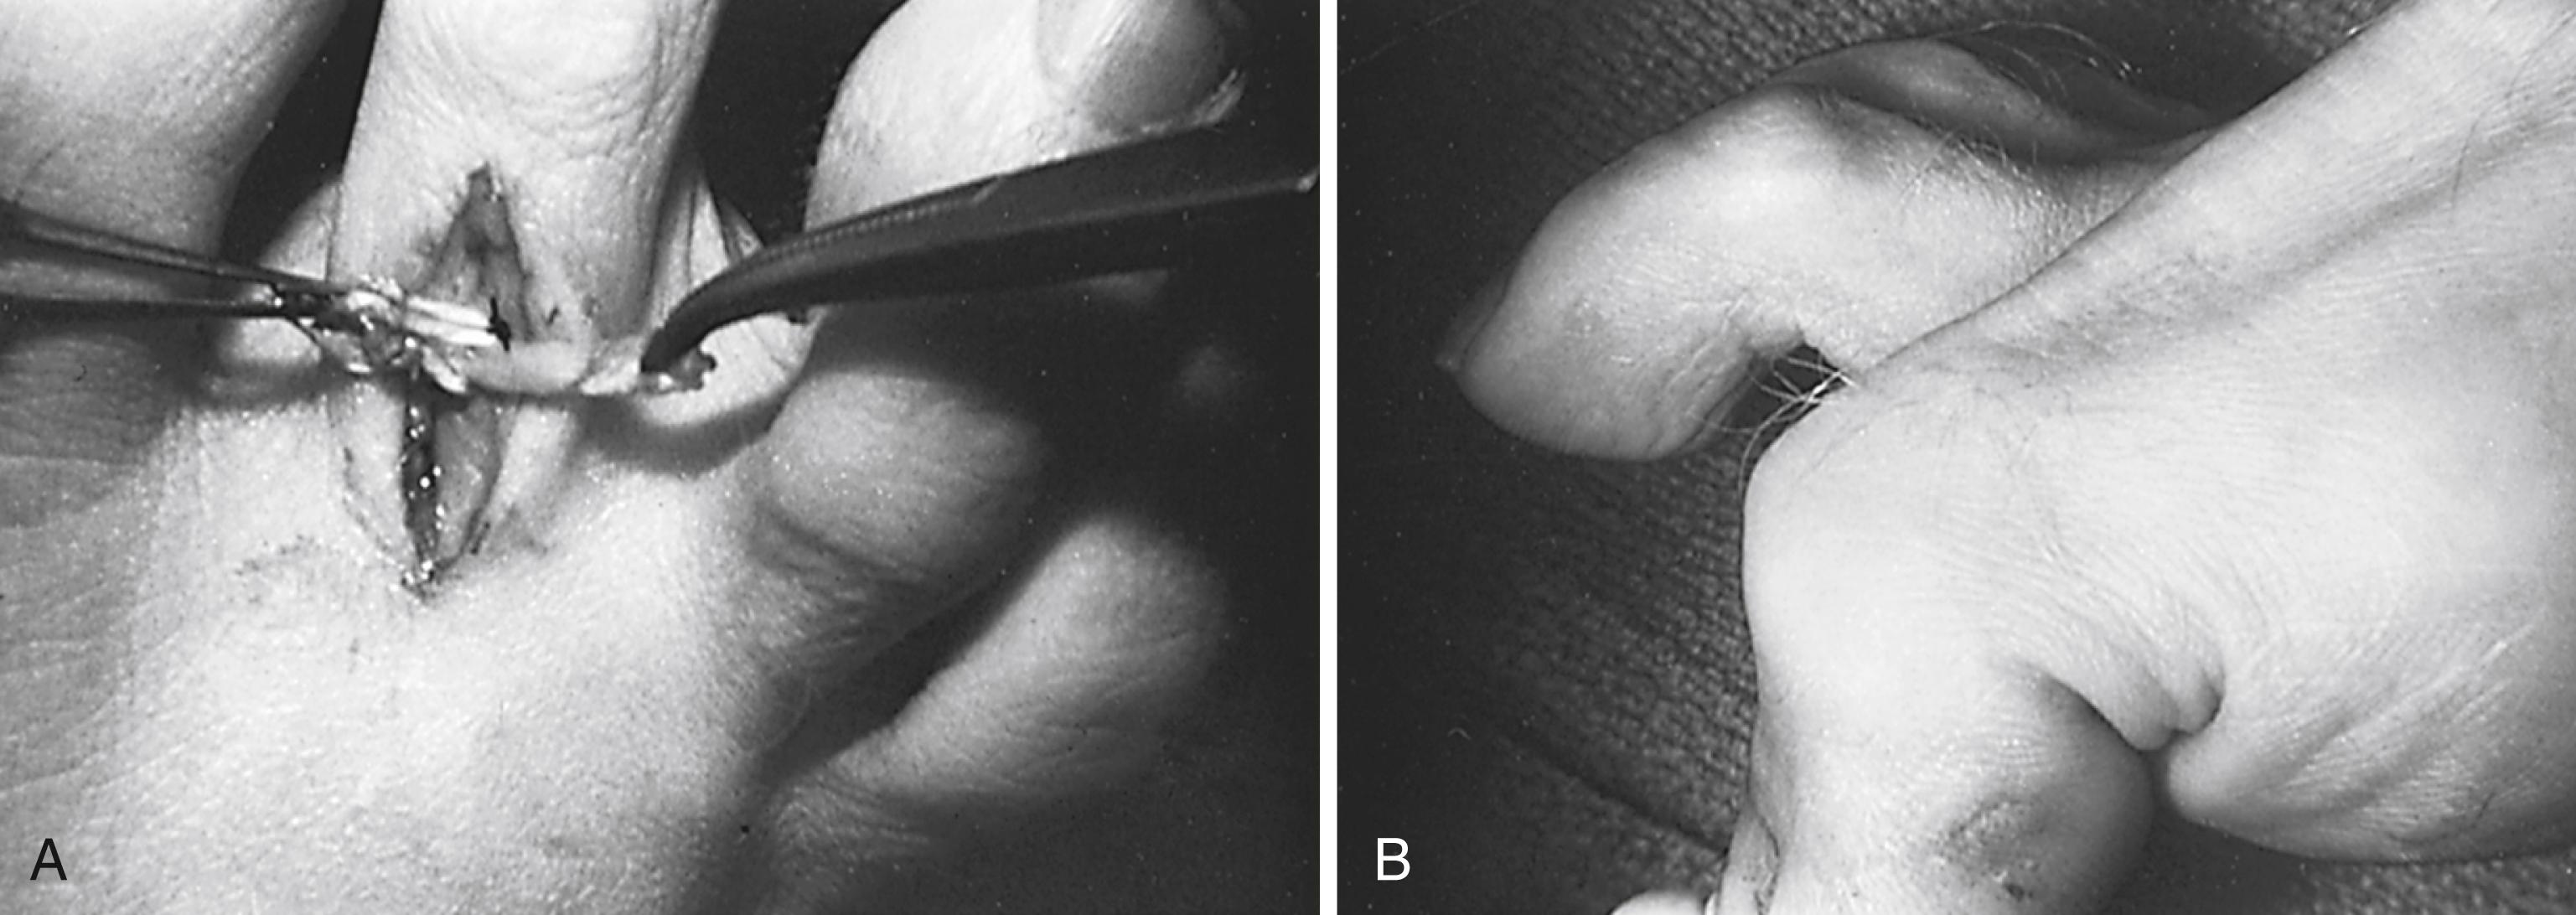 FIGURE 84.17, Flexible hammer toe. A, During transfer of flexor to extensor tendon. B, After surgery. Note small knot beneath skin. SEE TECHNIQUE 84.6 .